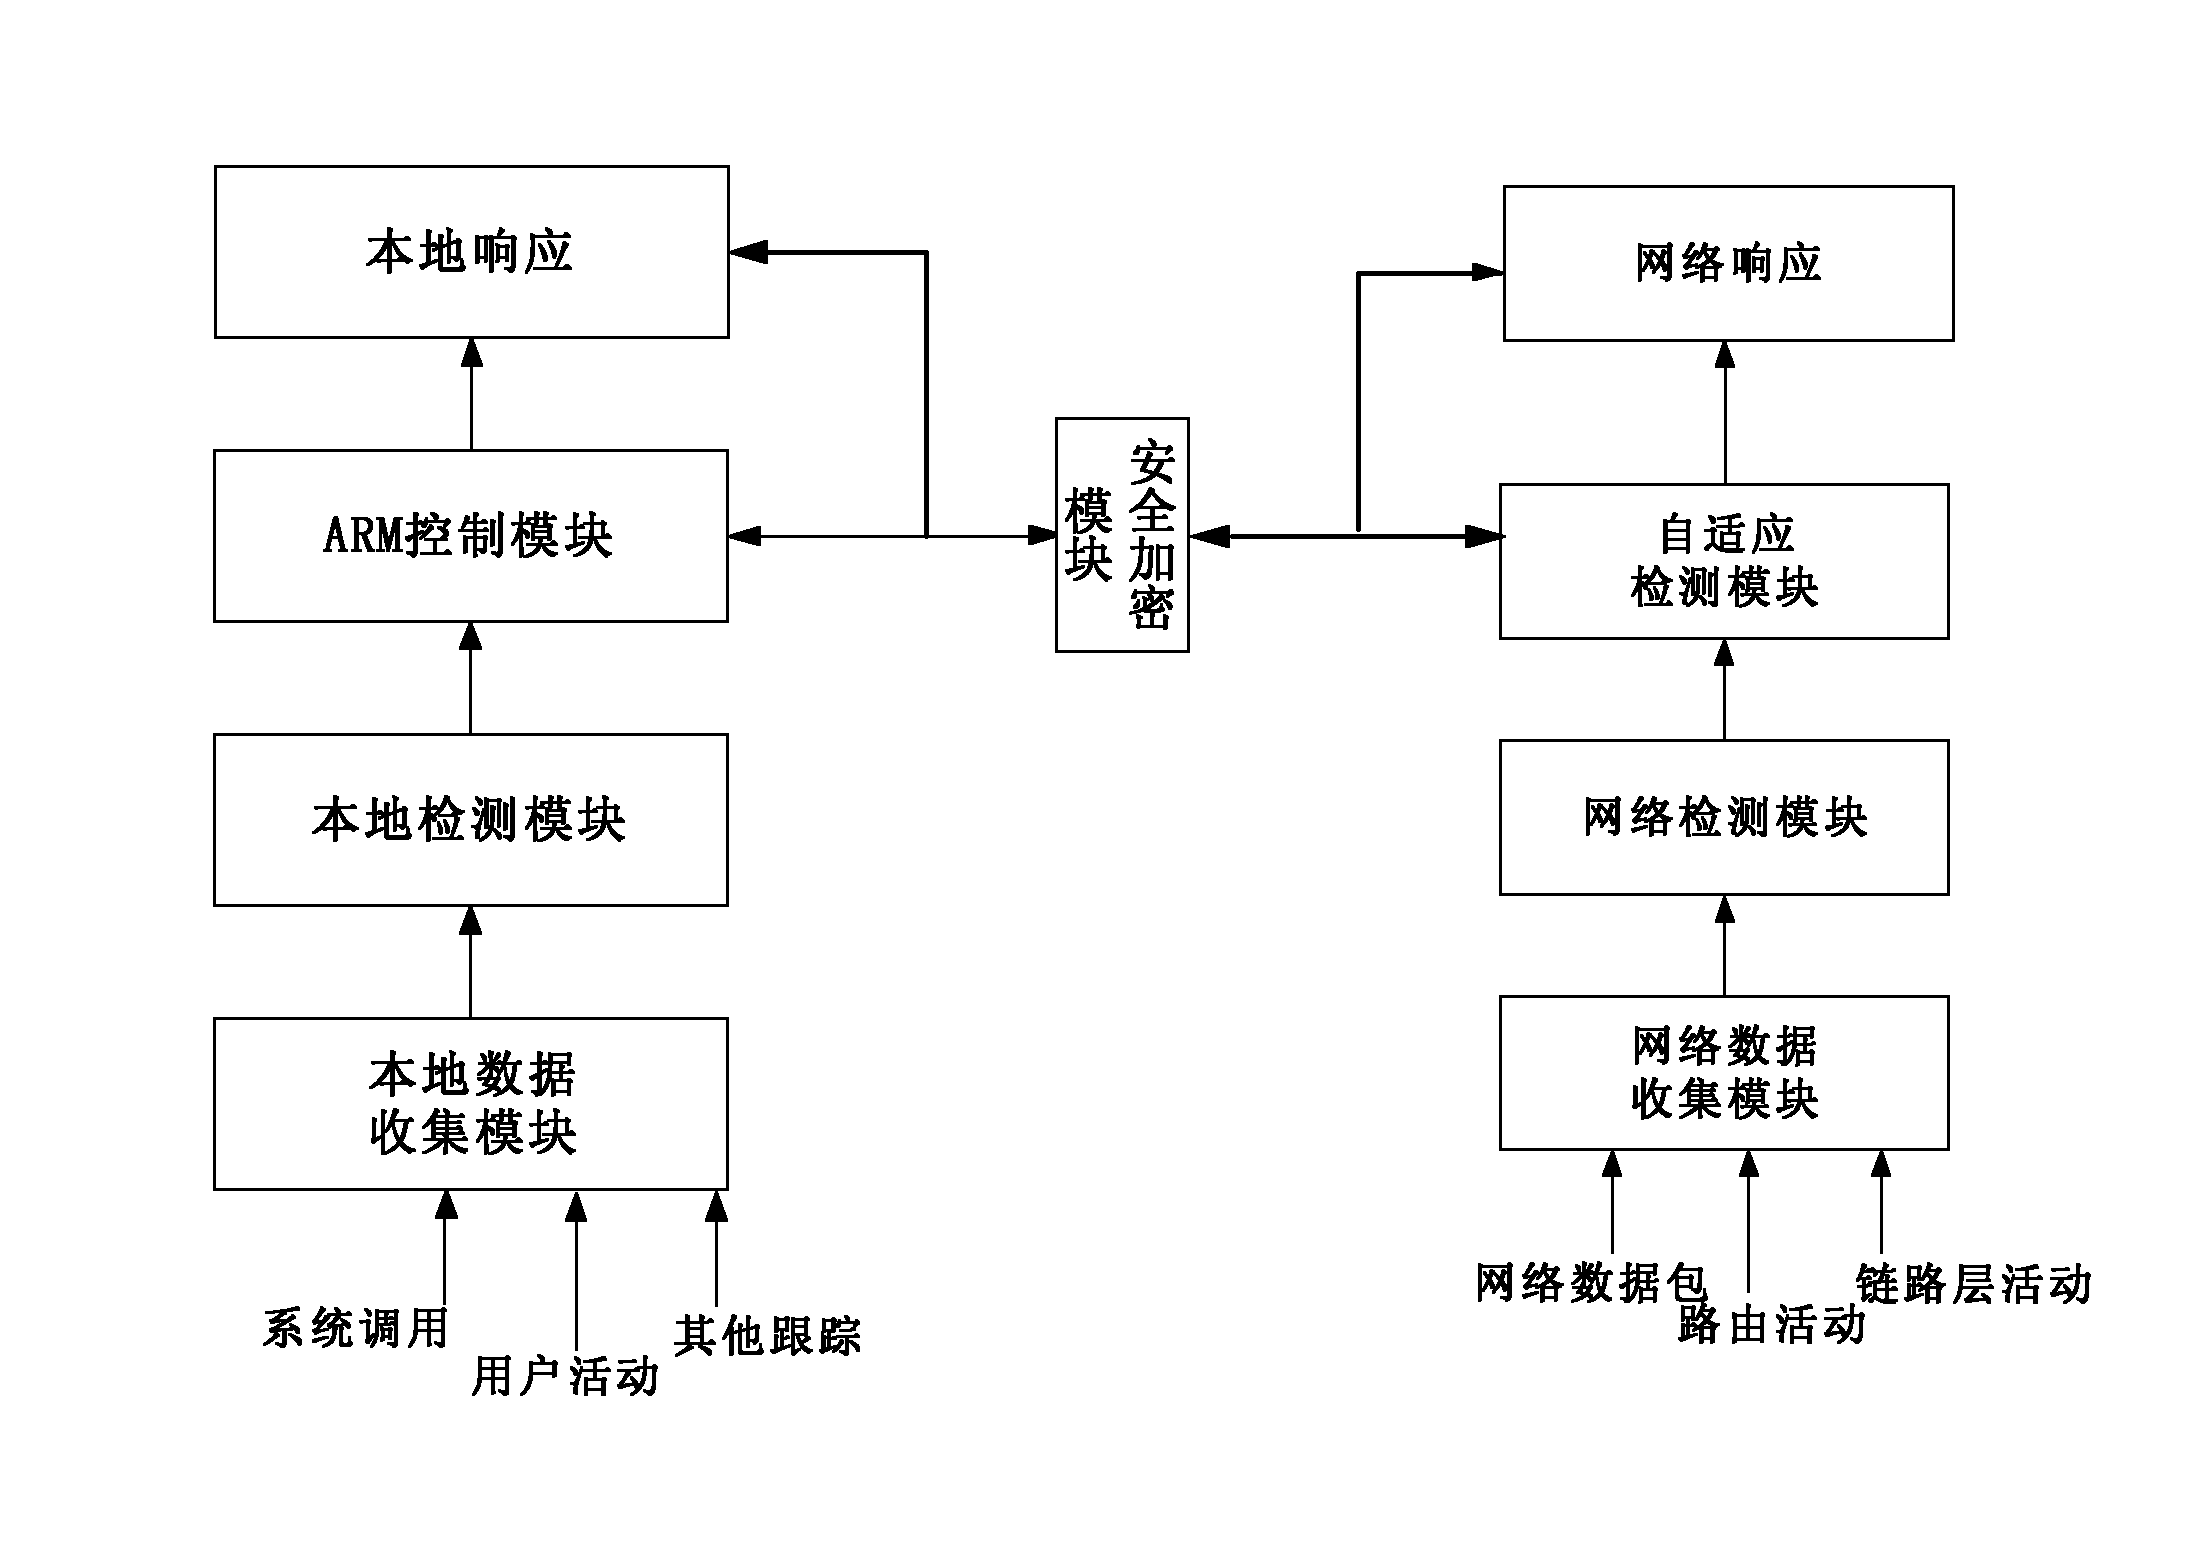 Mixed type self-adaption mobile network intrusion detection system